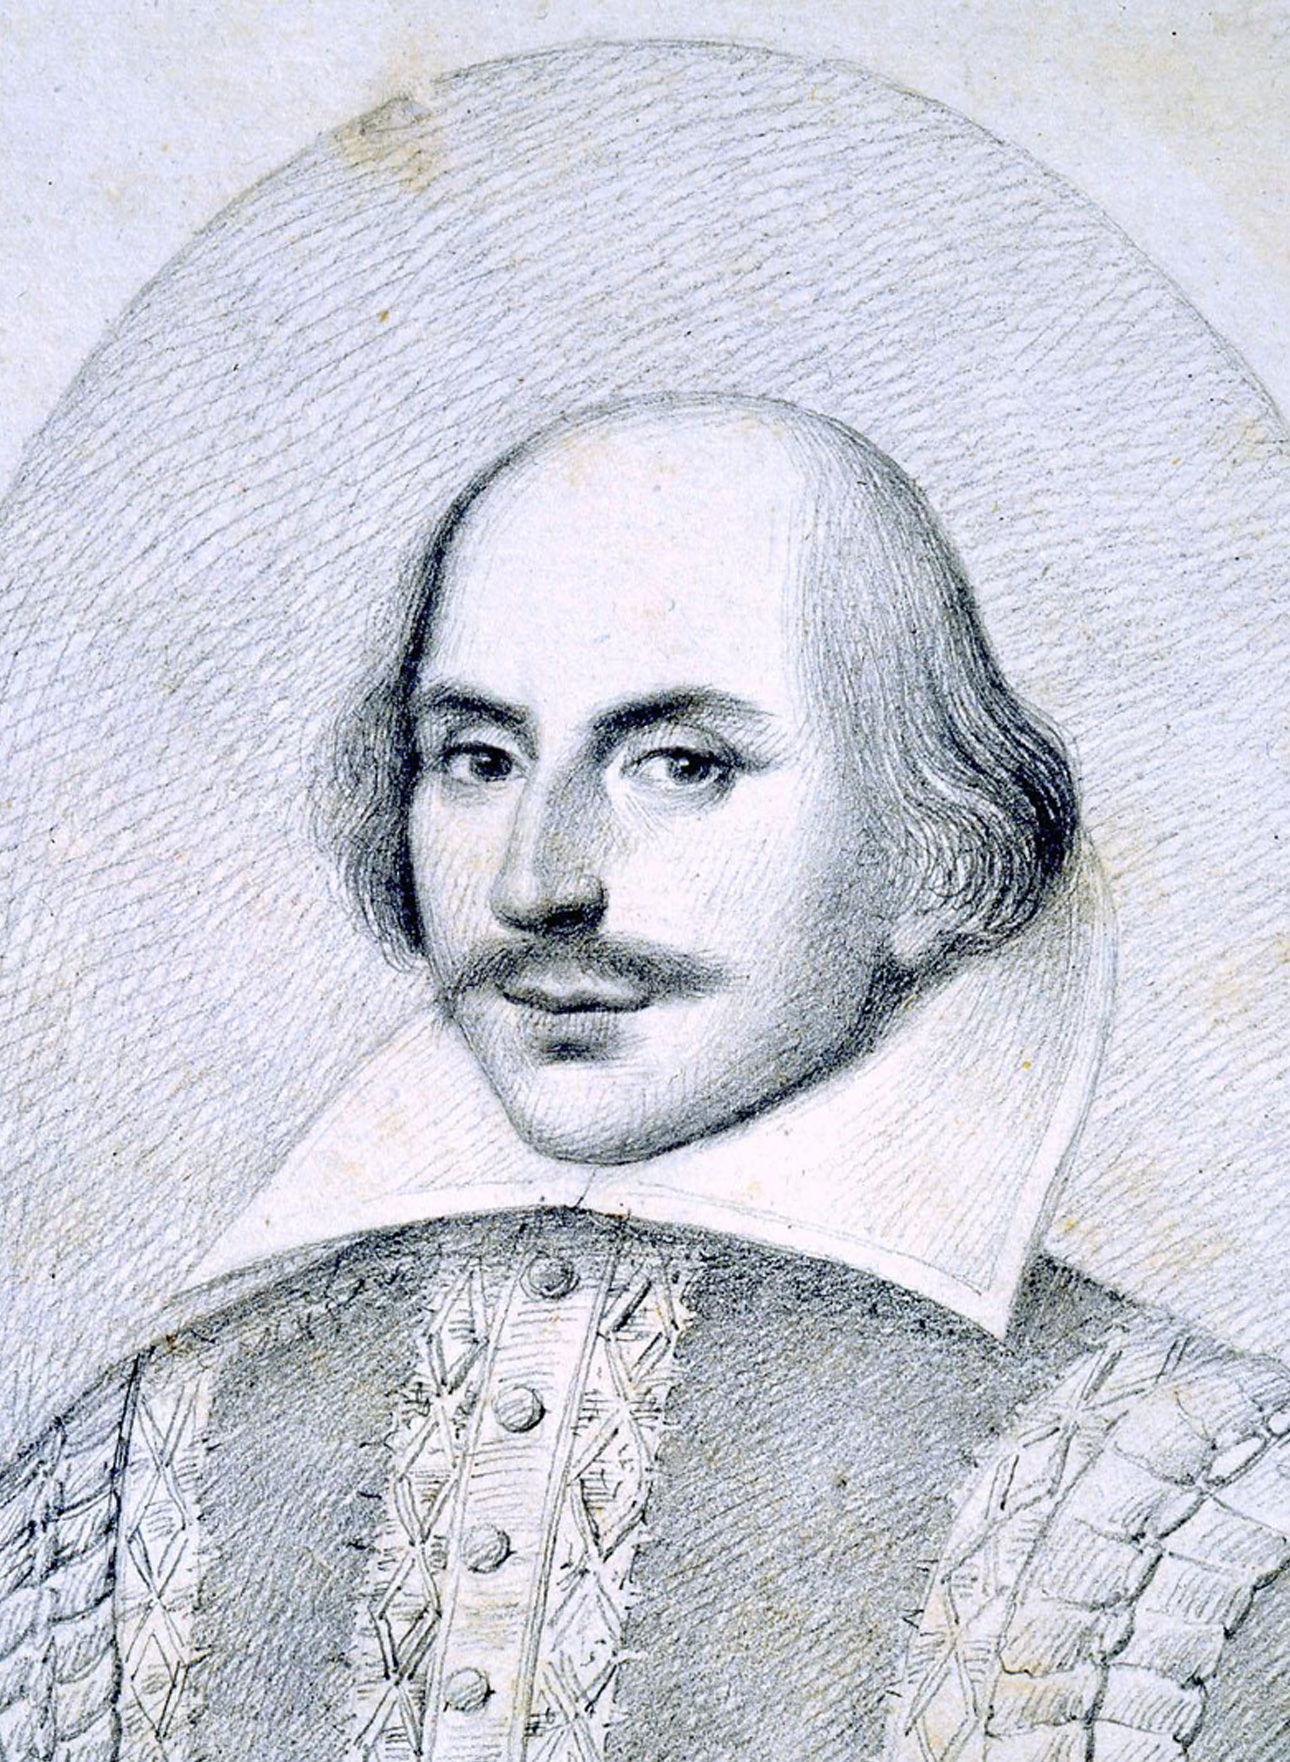 Drawing of William Shakespeare.